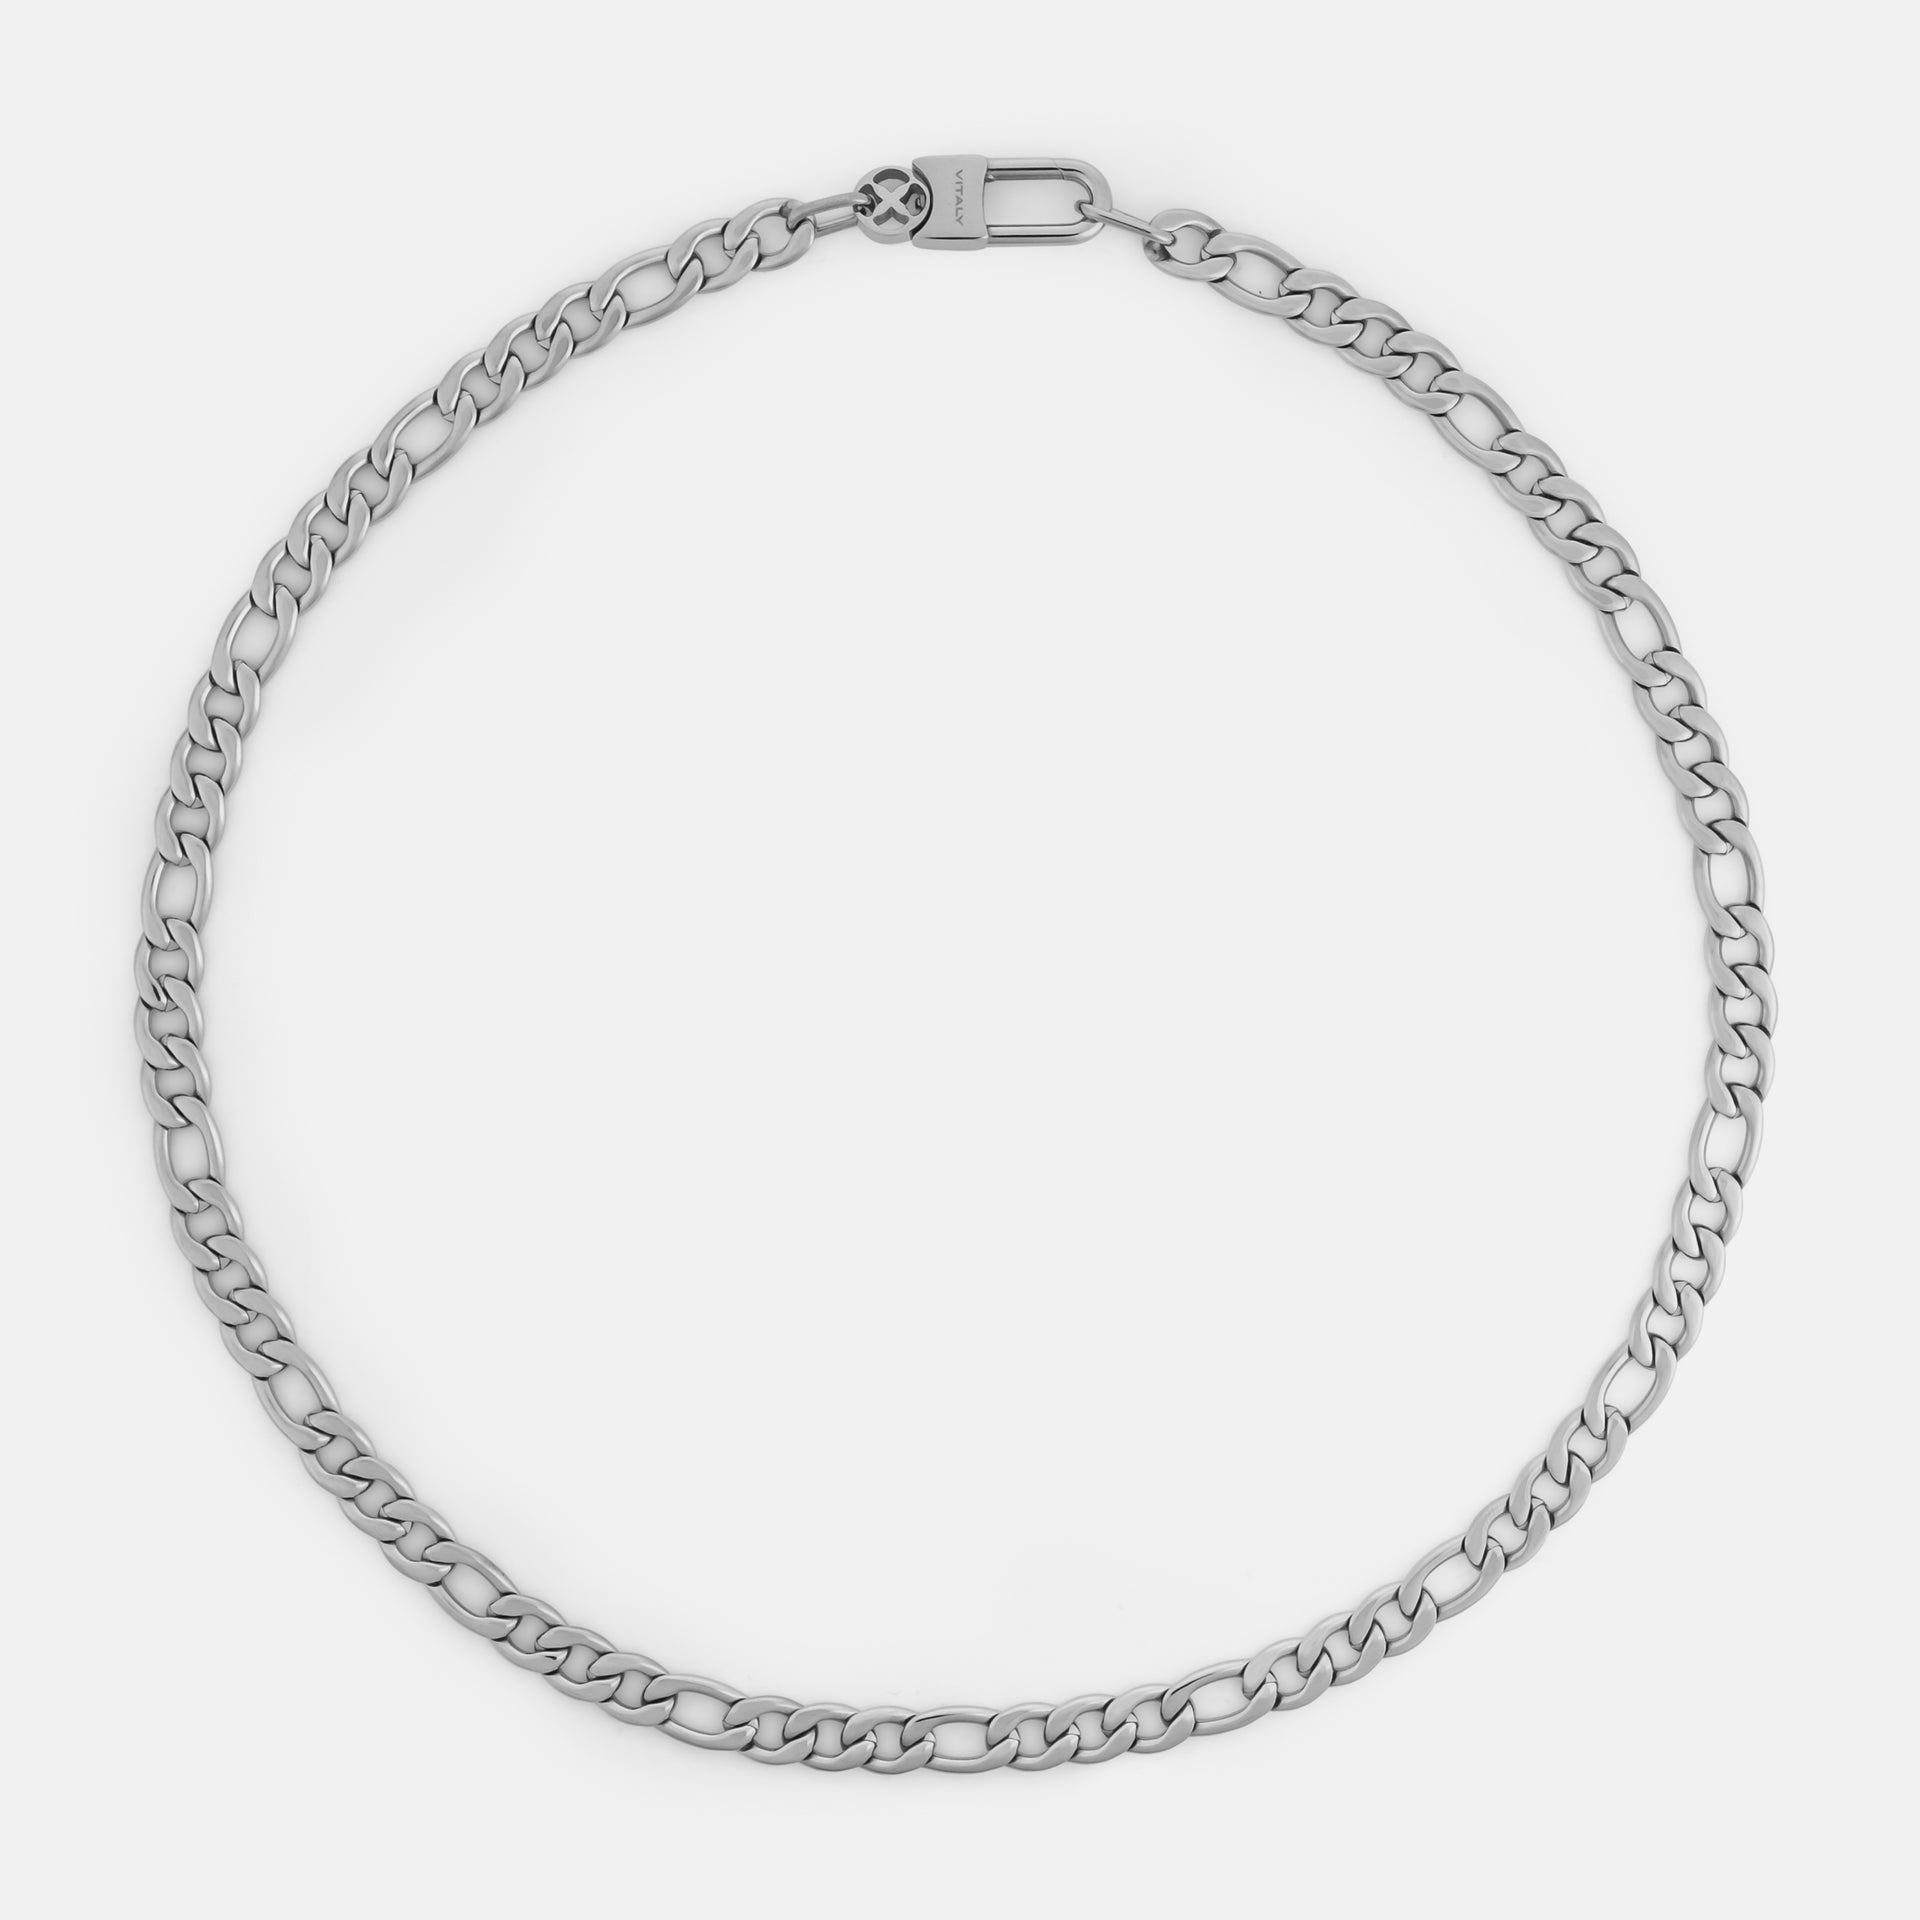 Shop Vitaly Unisex Street Style Chain Silver Stainless Logo by maisonsuzume